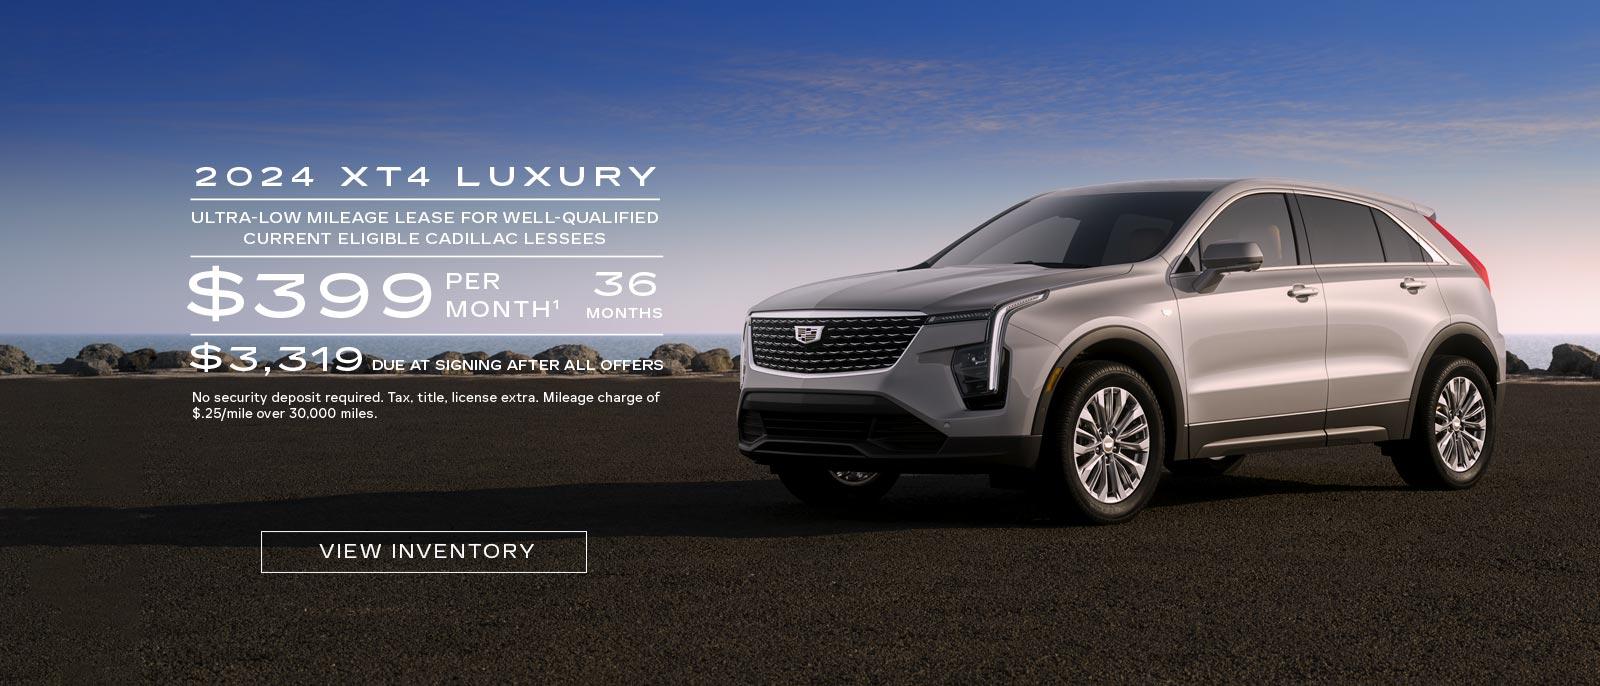 2024 XT4 Luxury. Ultra-low mileage lease for well-qualified current eligible Cadillac lessees. $399 per month. 36 months. $3,319 due at signing after all offers.